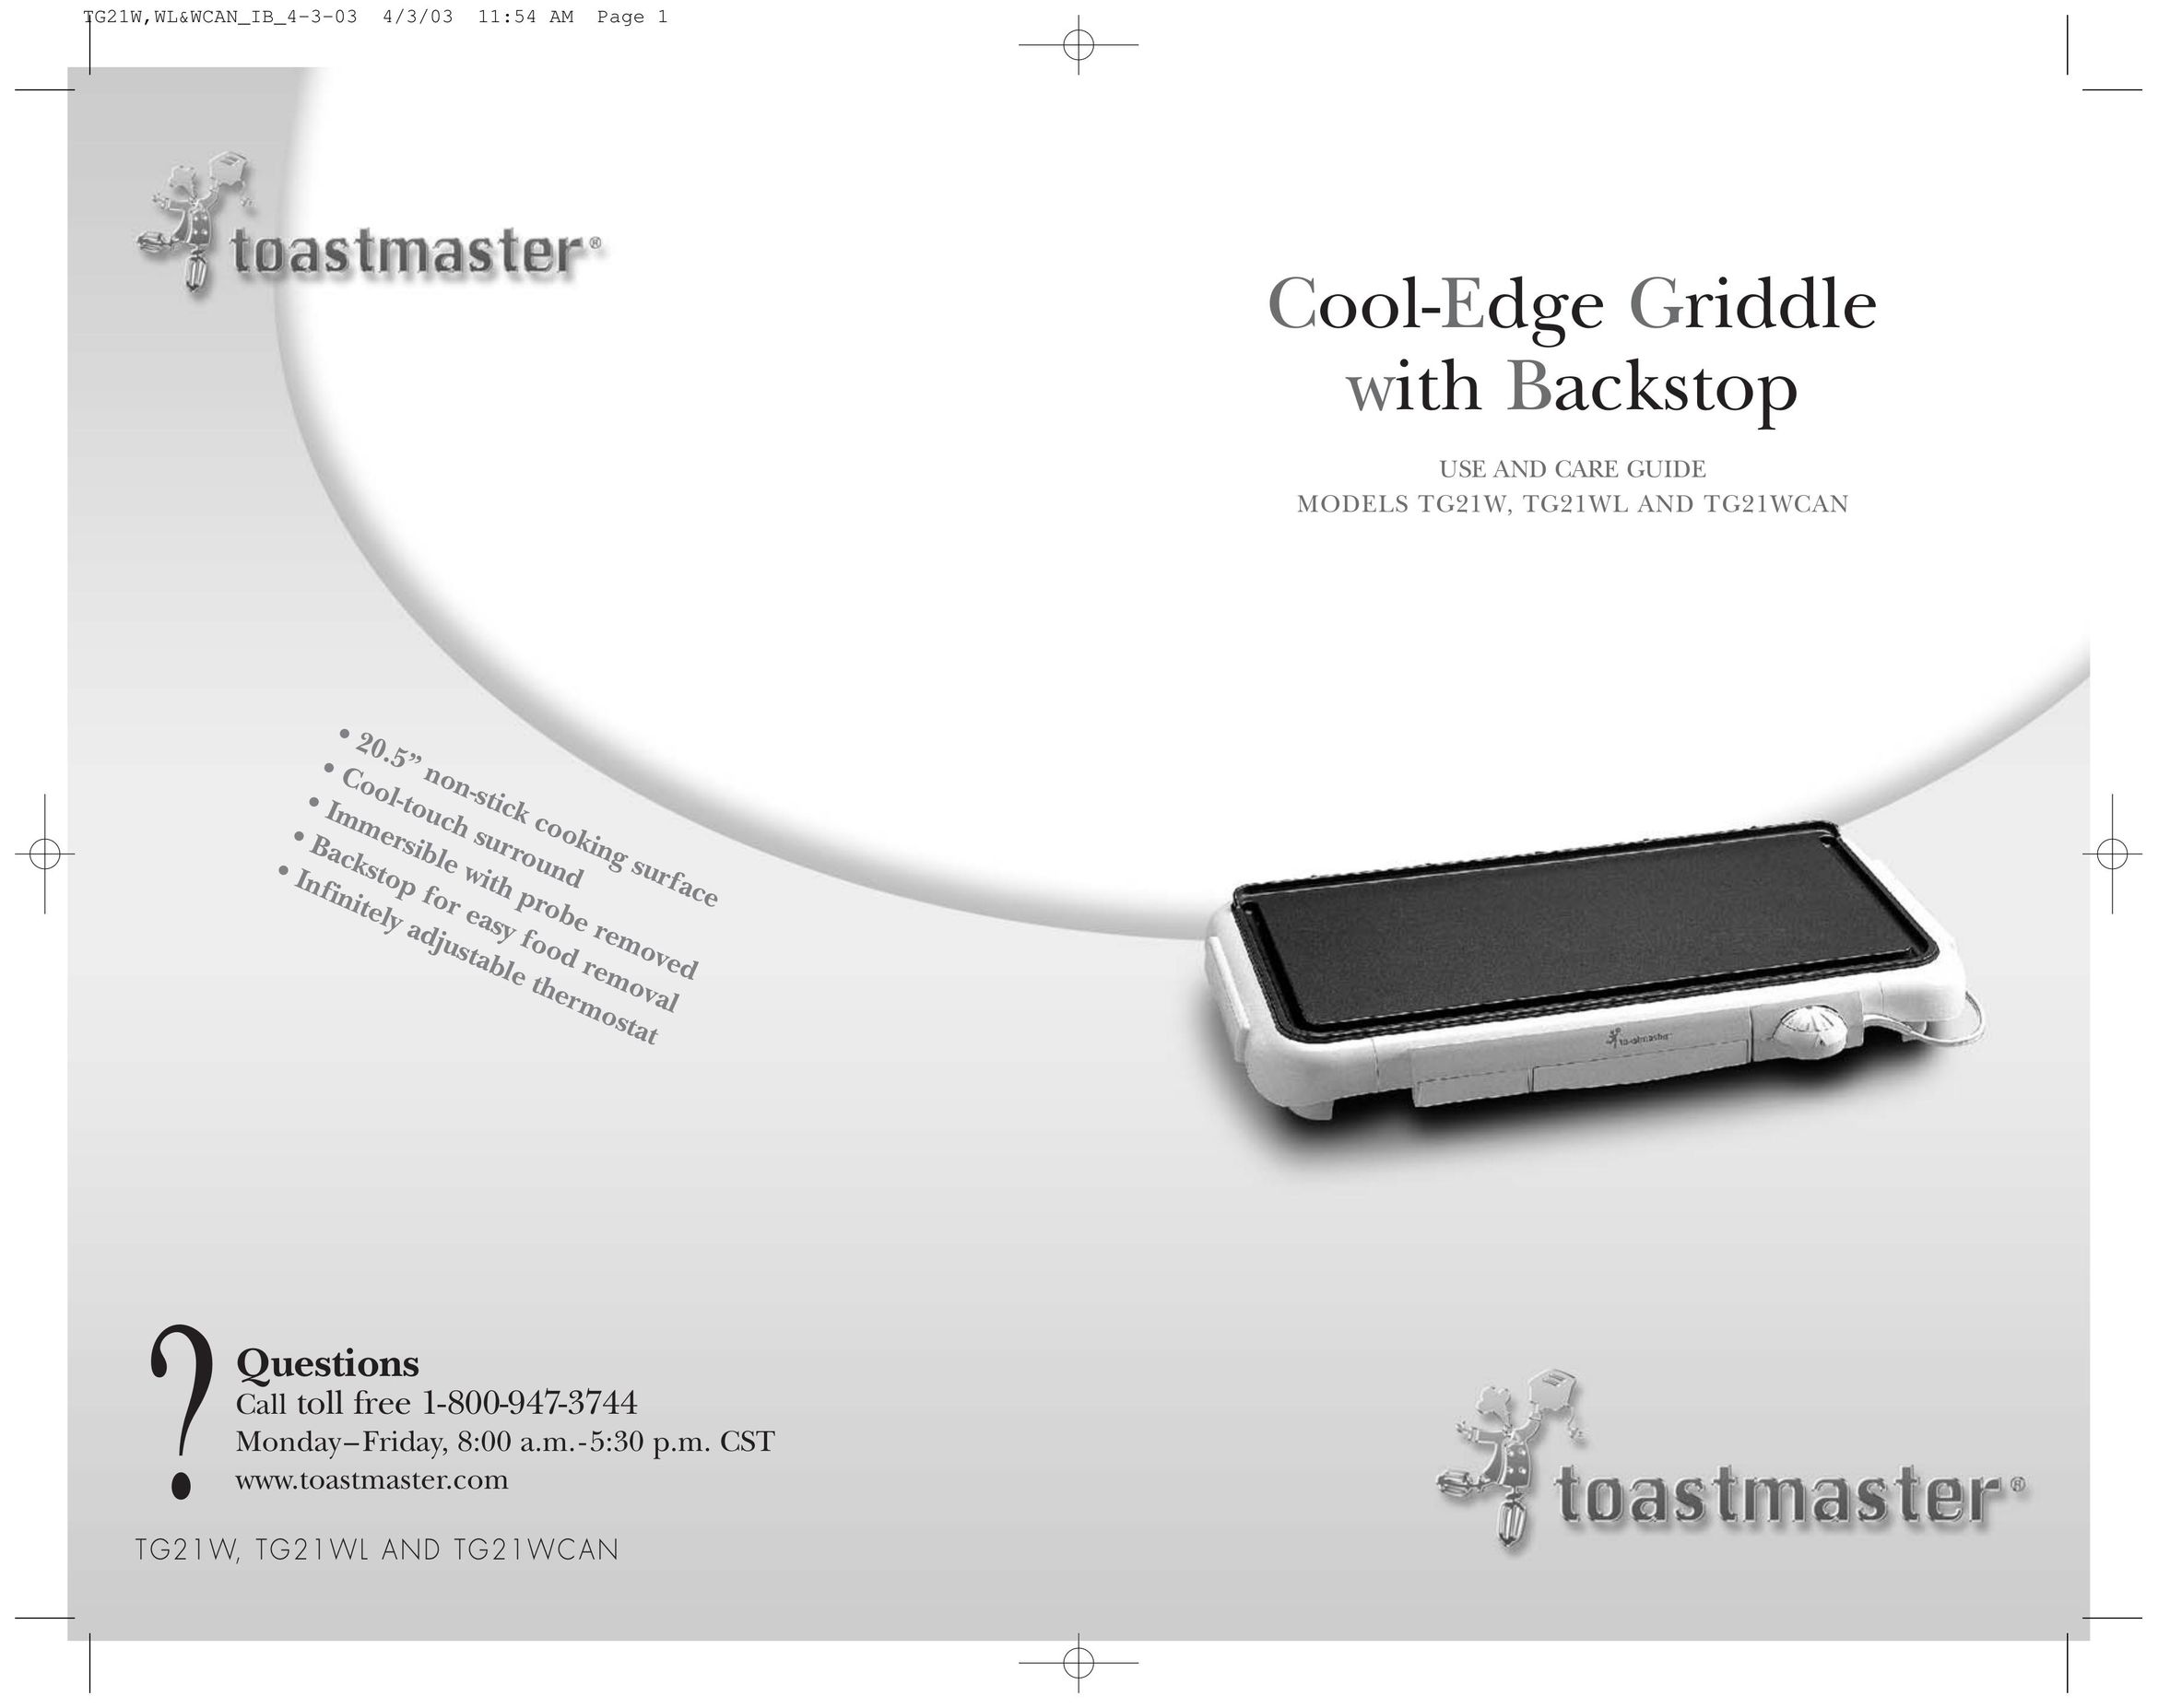 Toastmaster TG21WL TG21WCAN Griddle User Manual